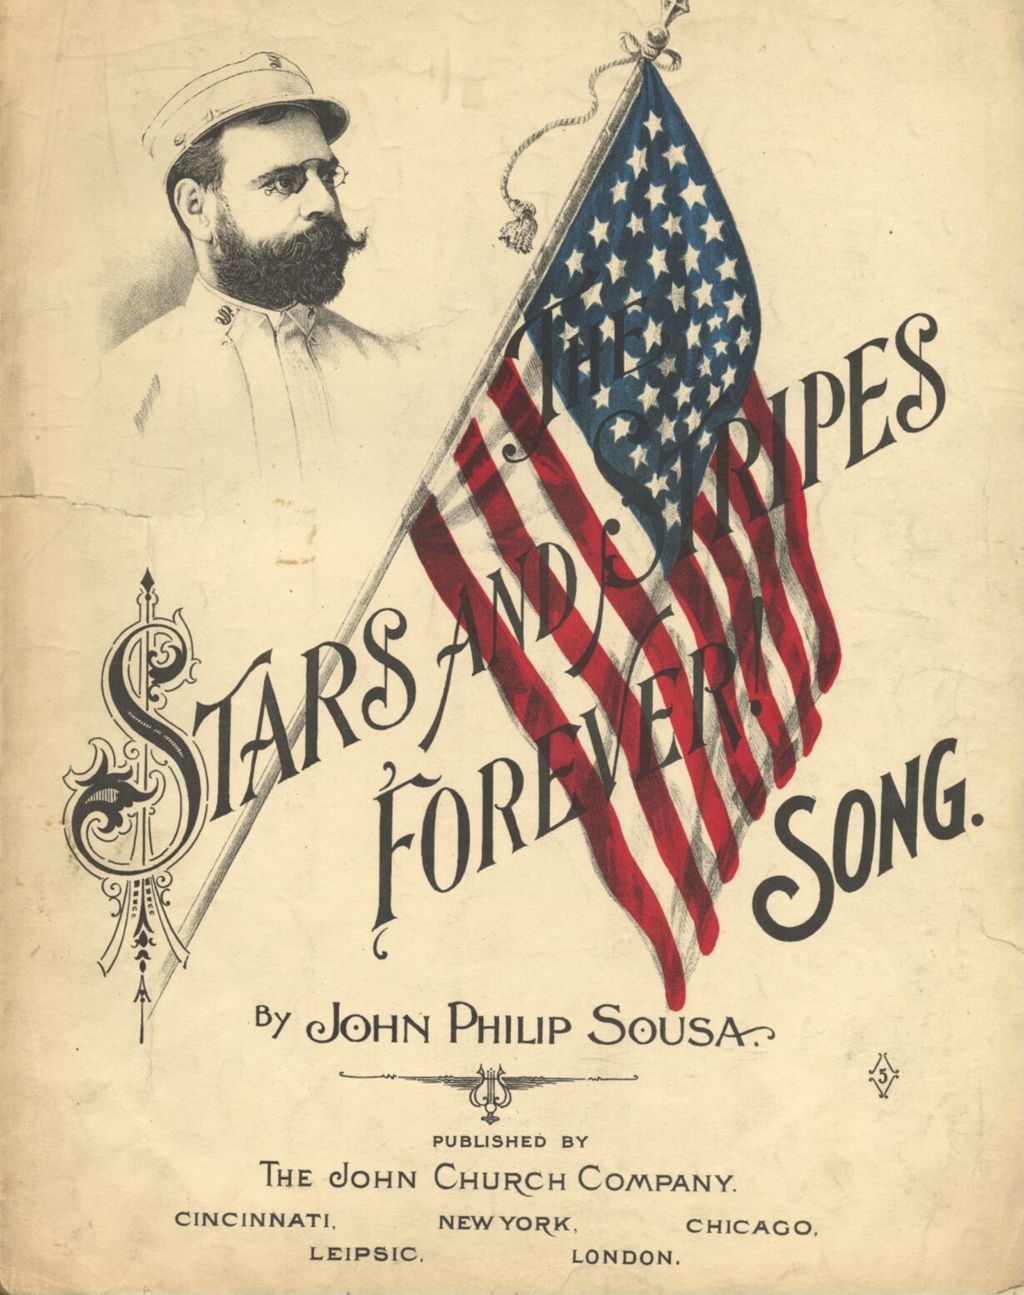 Miniature of Stars and Stripes Forever (Song)